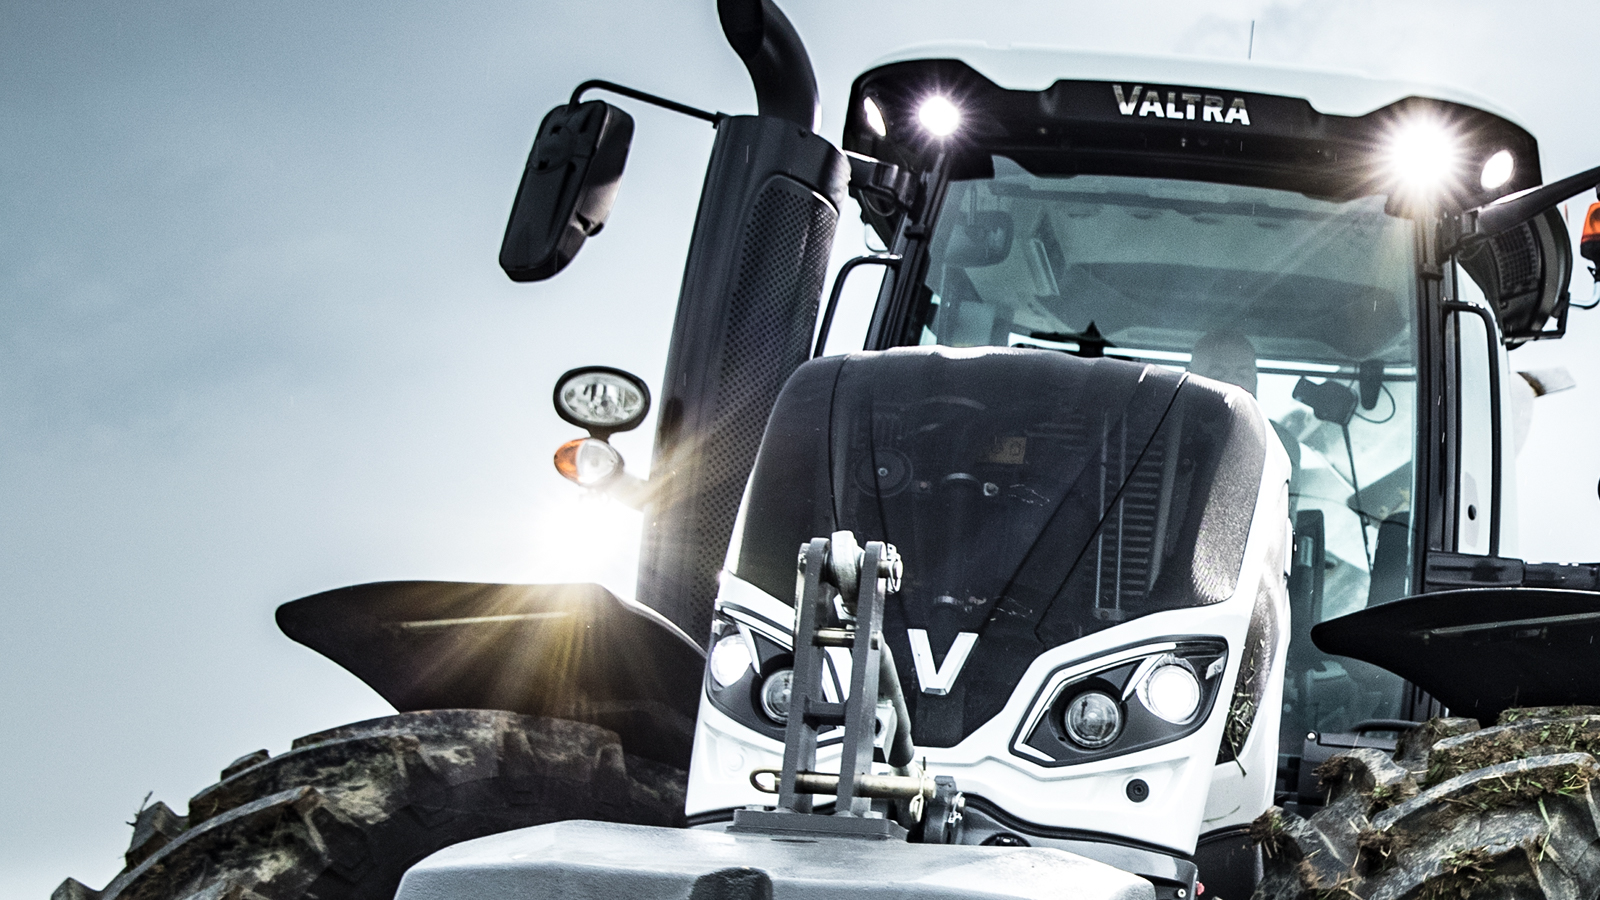 valtra tractor white front